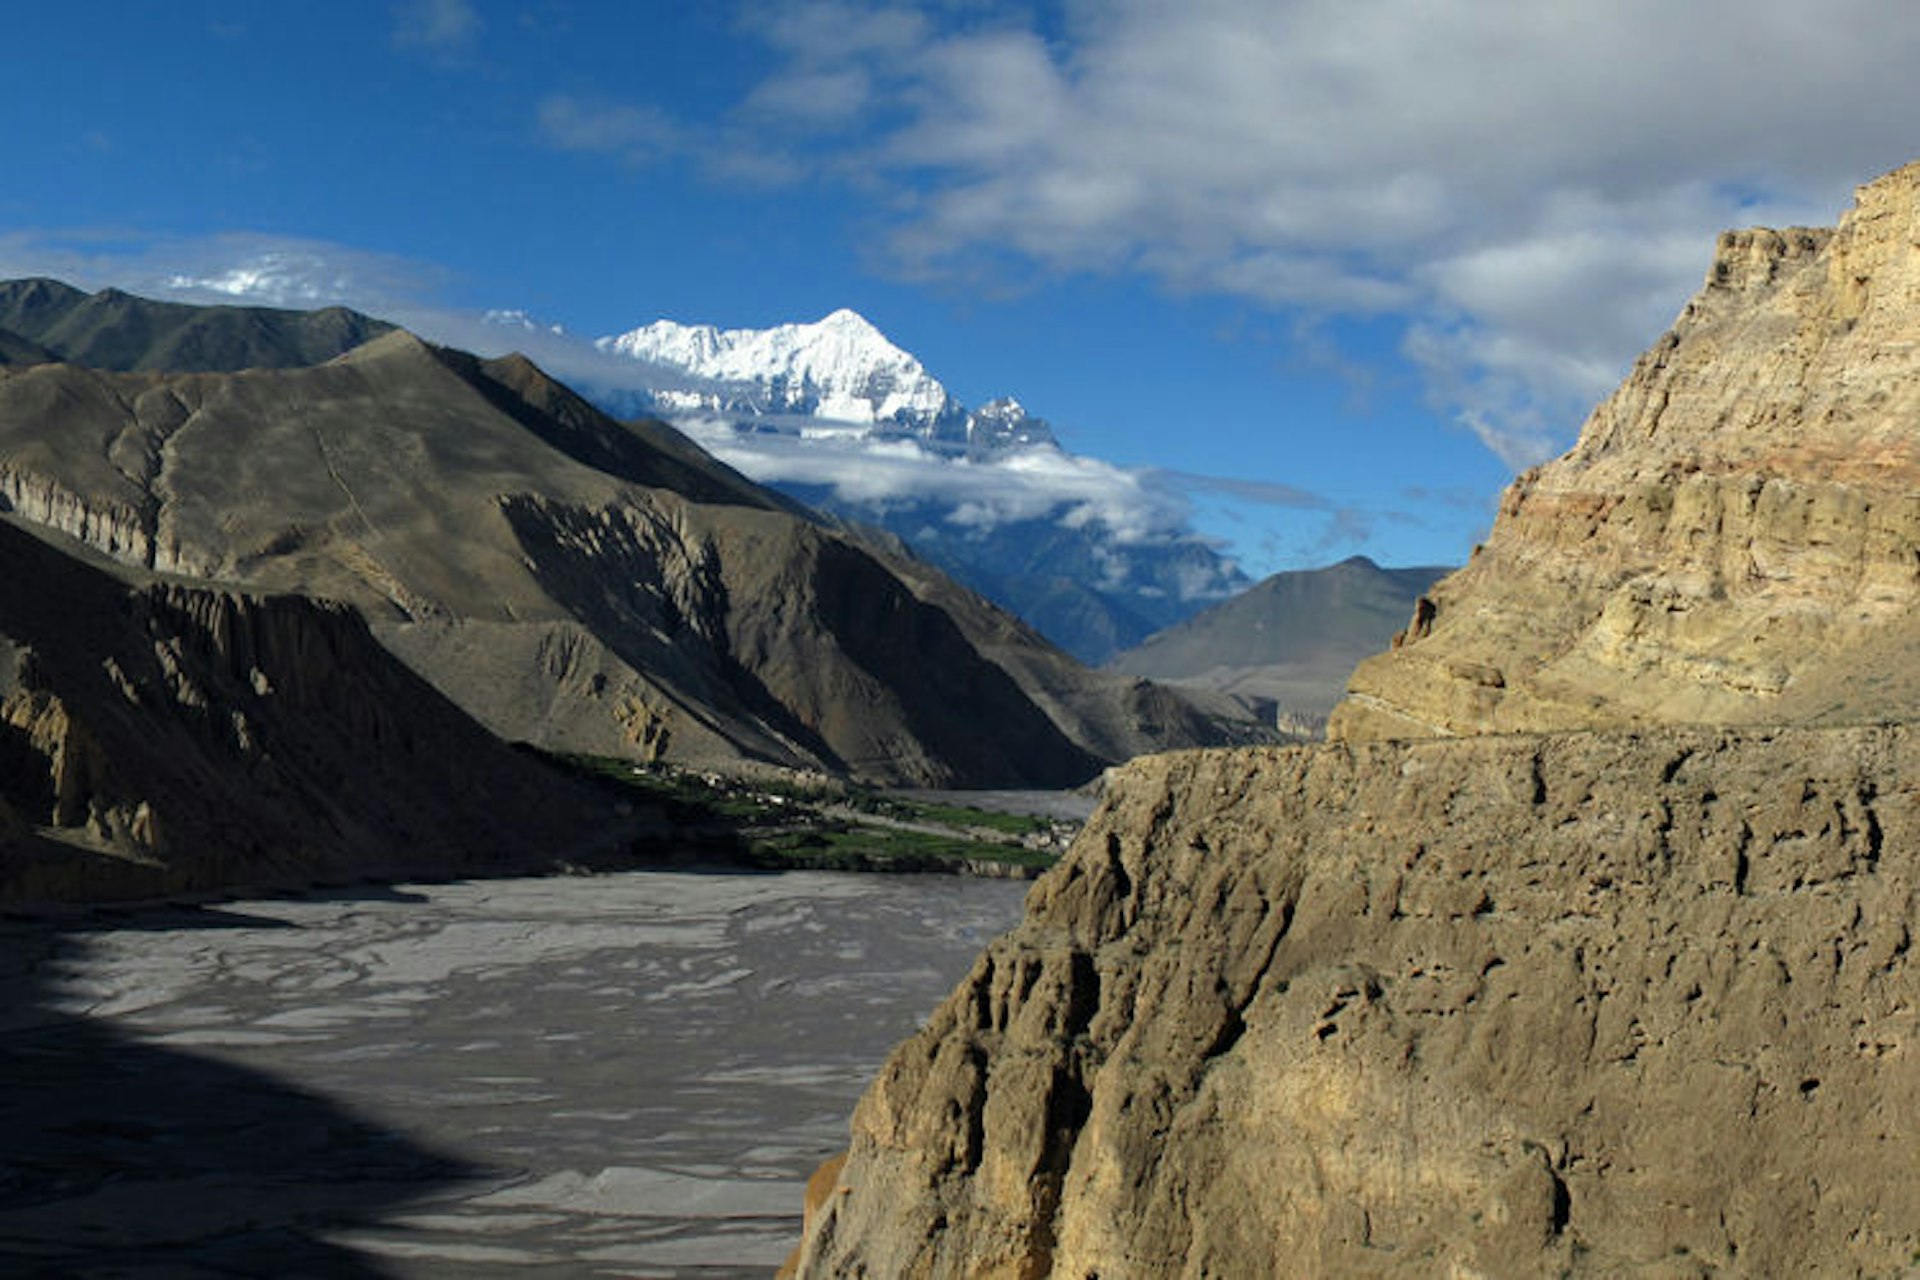 Mountain landscape in Mustang, Nepal. Image by simonsimages / CC BY 2.0.